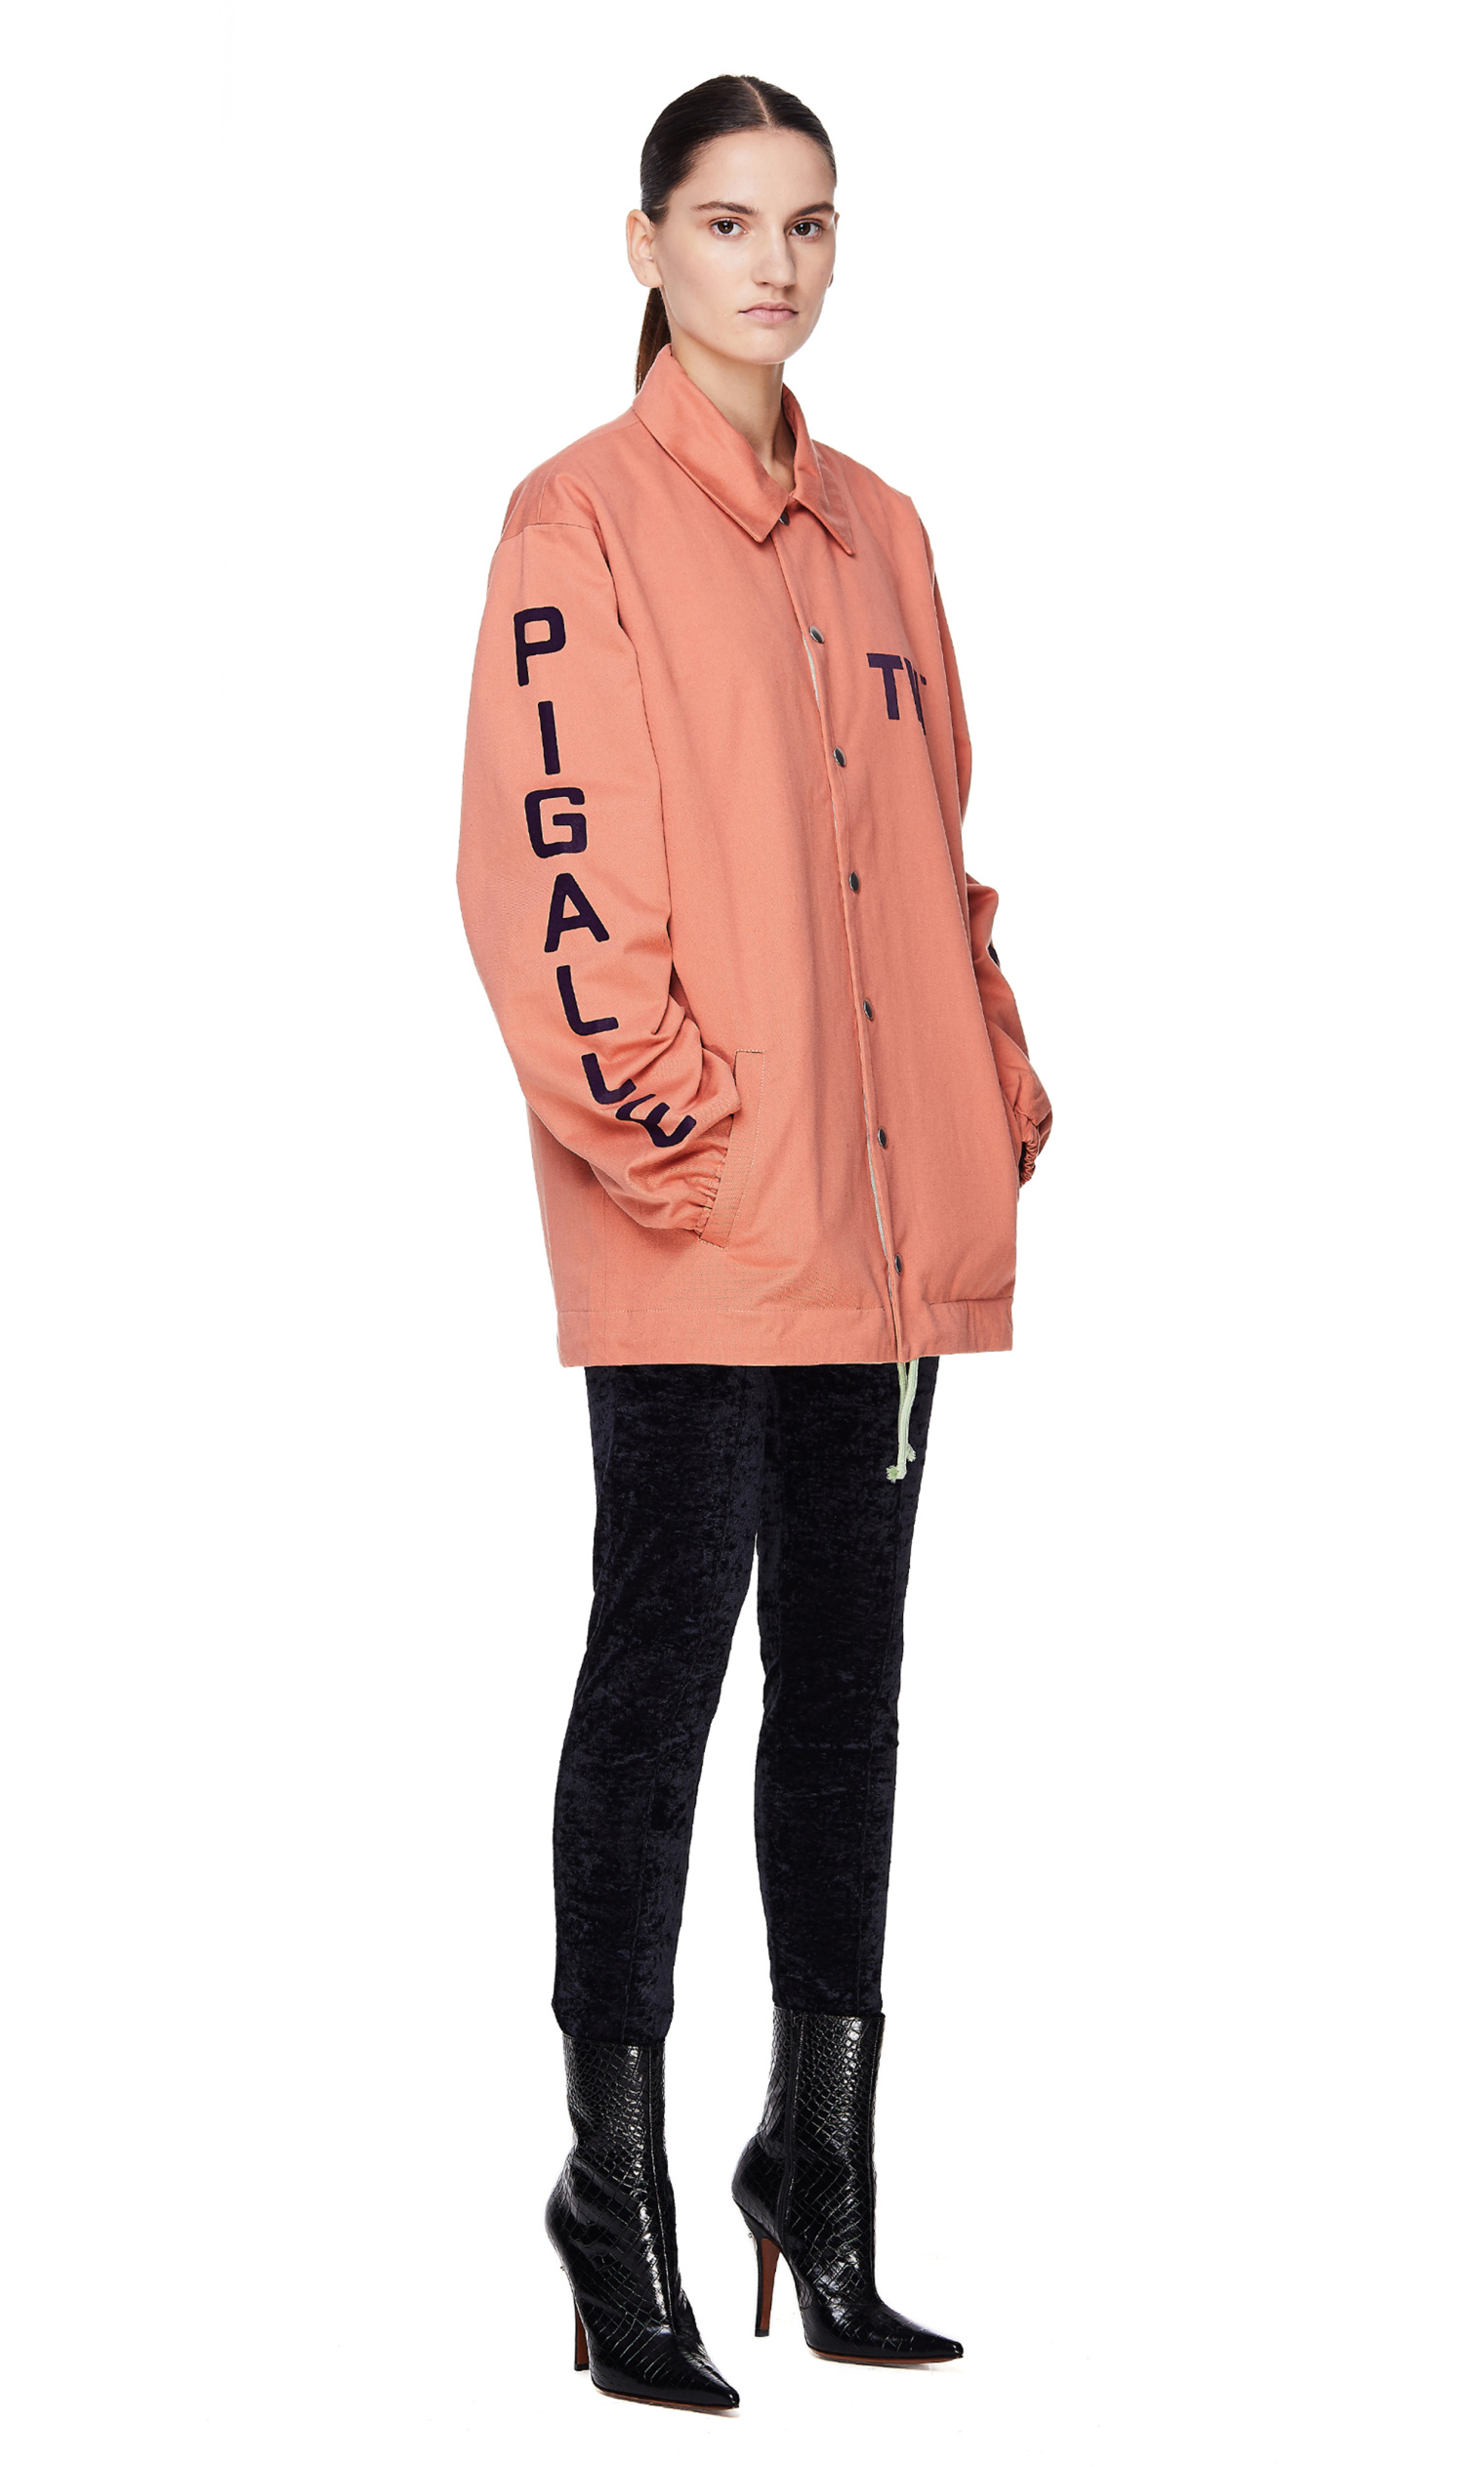 Pigalle Jacket